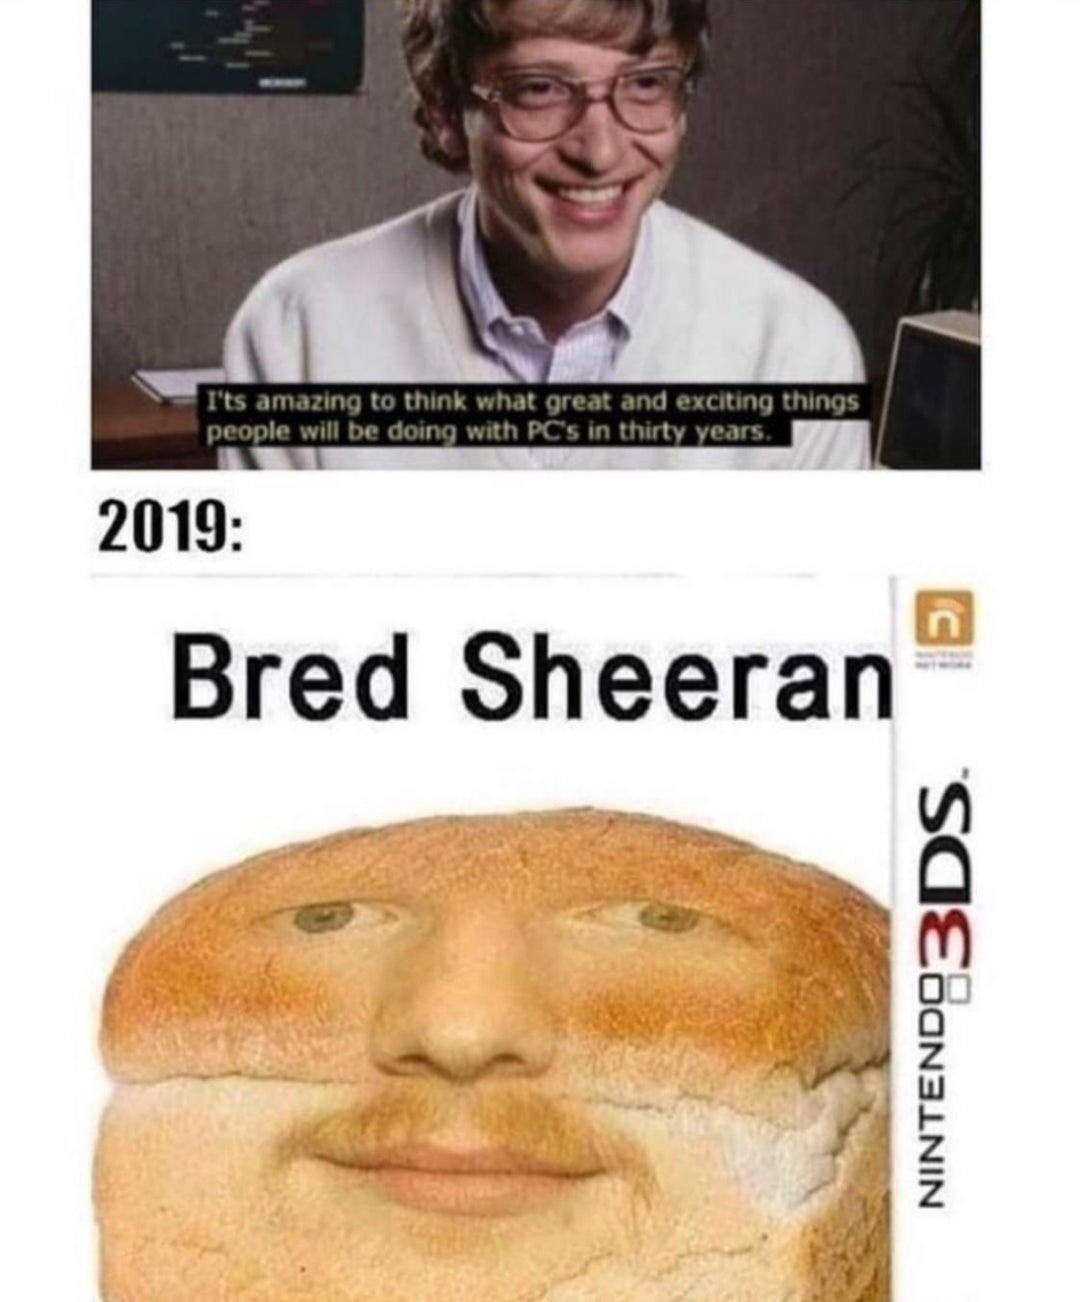 bred sheeran - I'ts amazing to think what great and exciting things people will be doing with Pc's in thirty years. 2019 Bred Sheeran Nintendo 3DS.